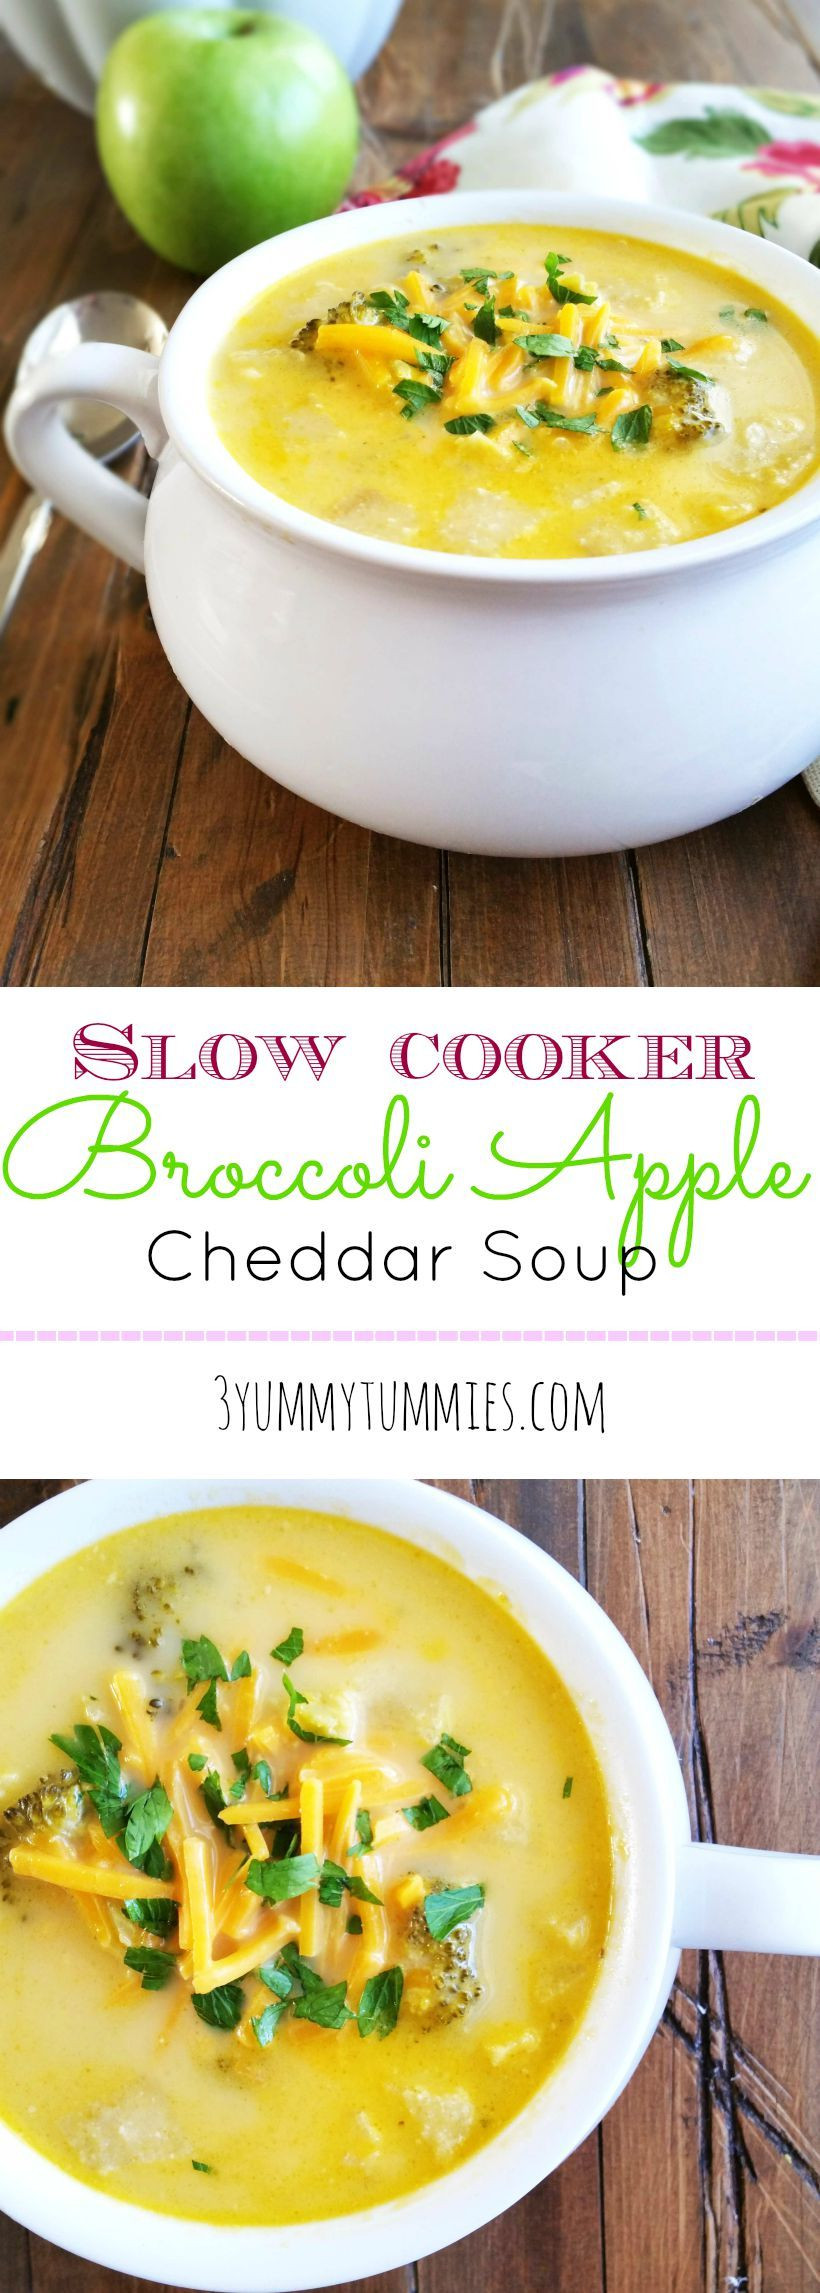 Slow Cooker Broccoli Cheddar Soup
 Slow Cooker Broccoli Apple Cheddar Soup